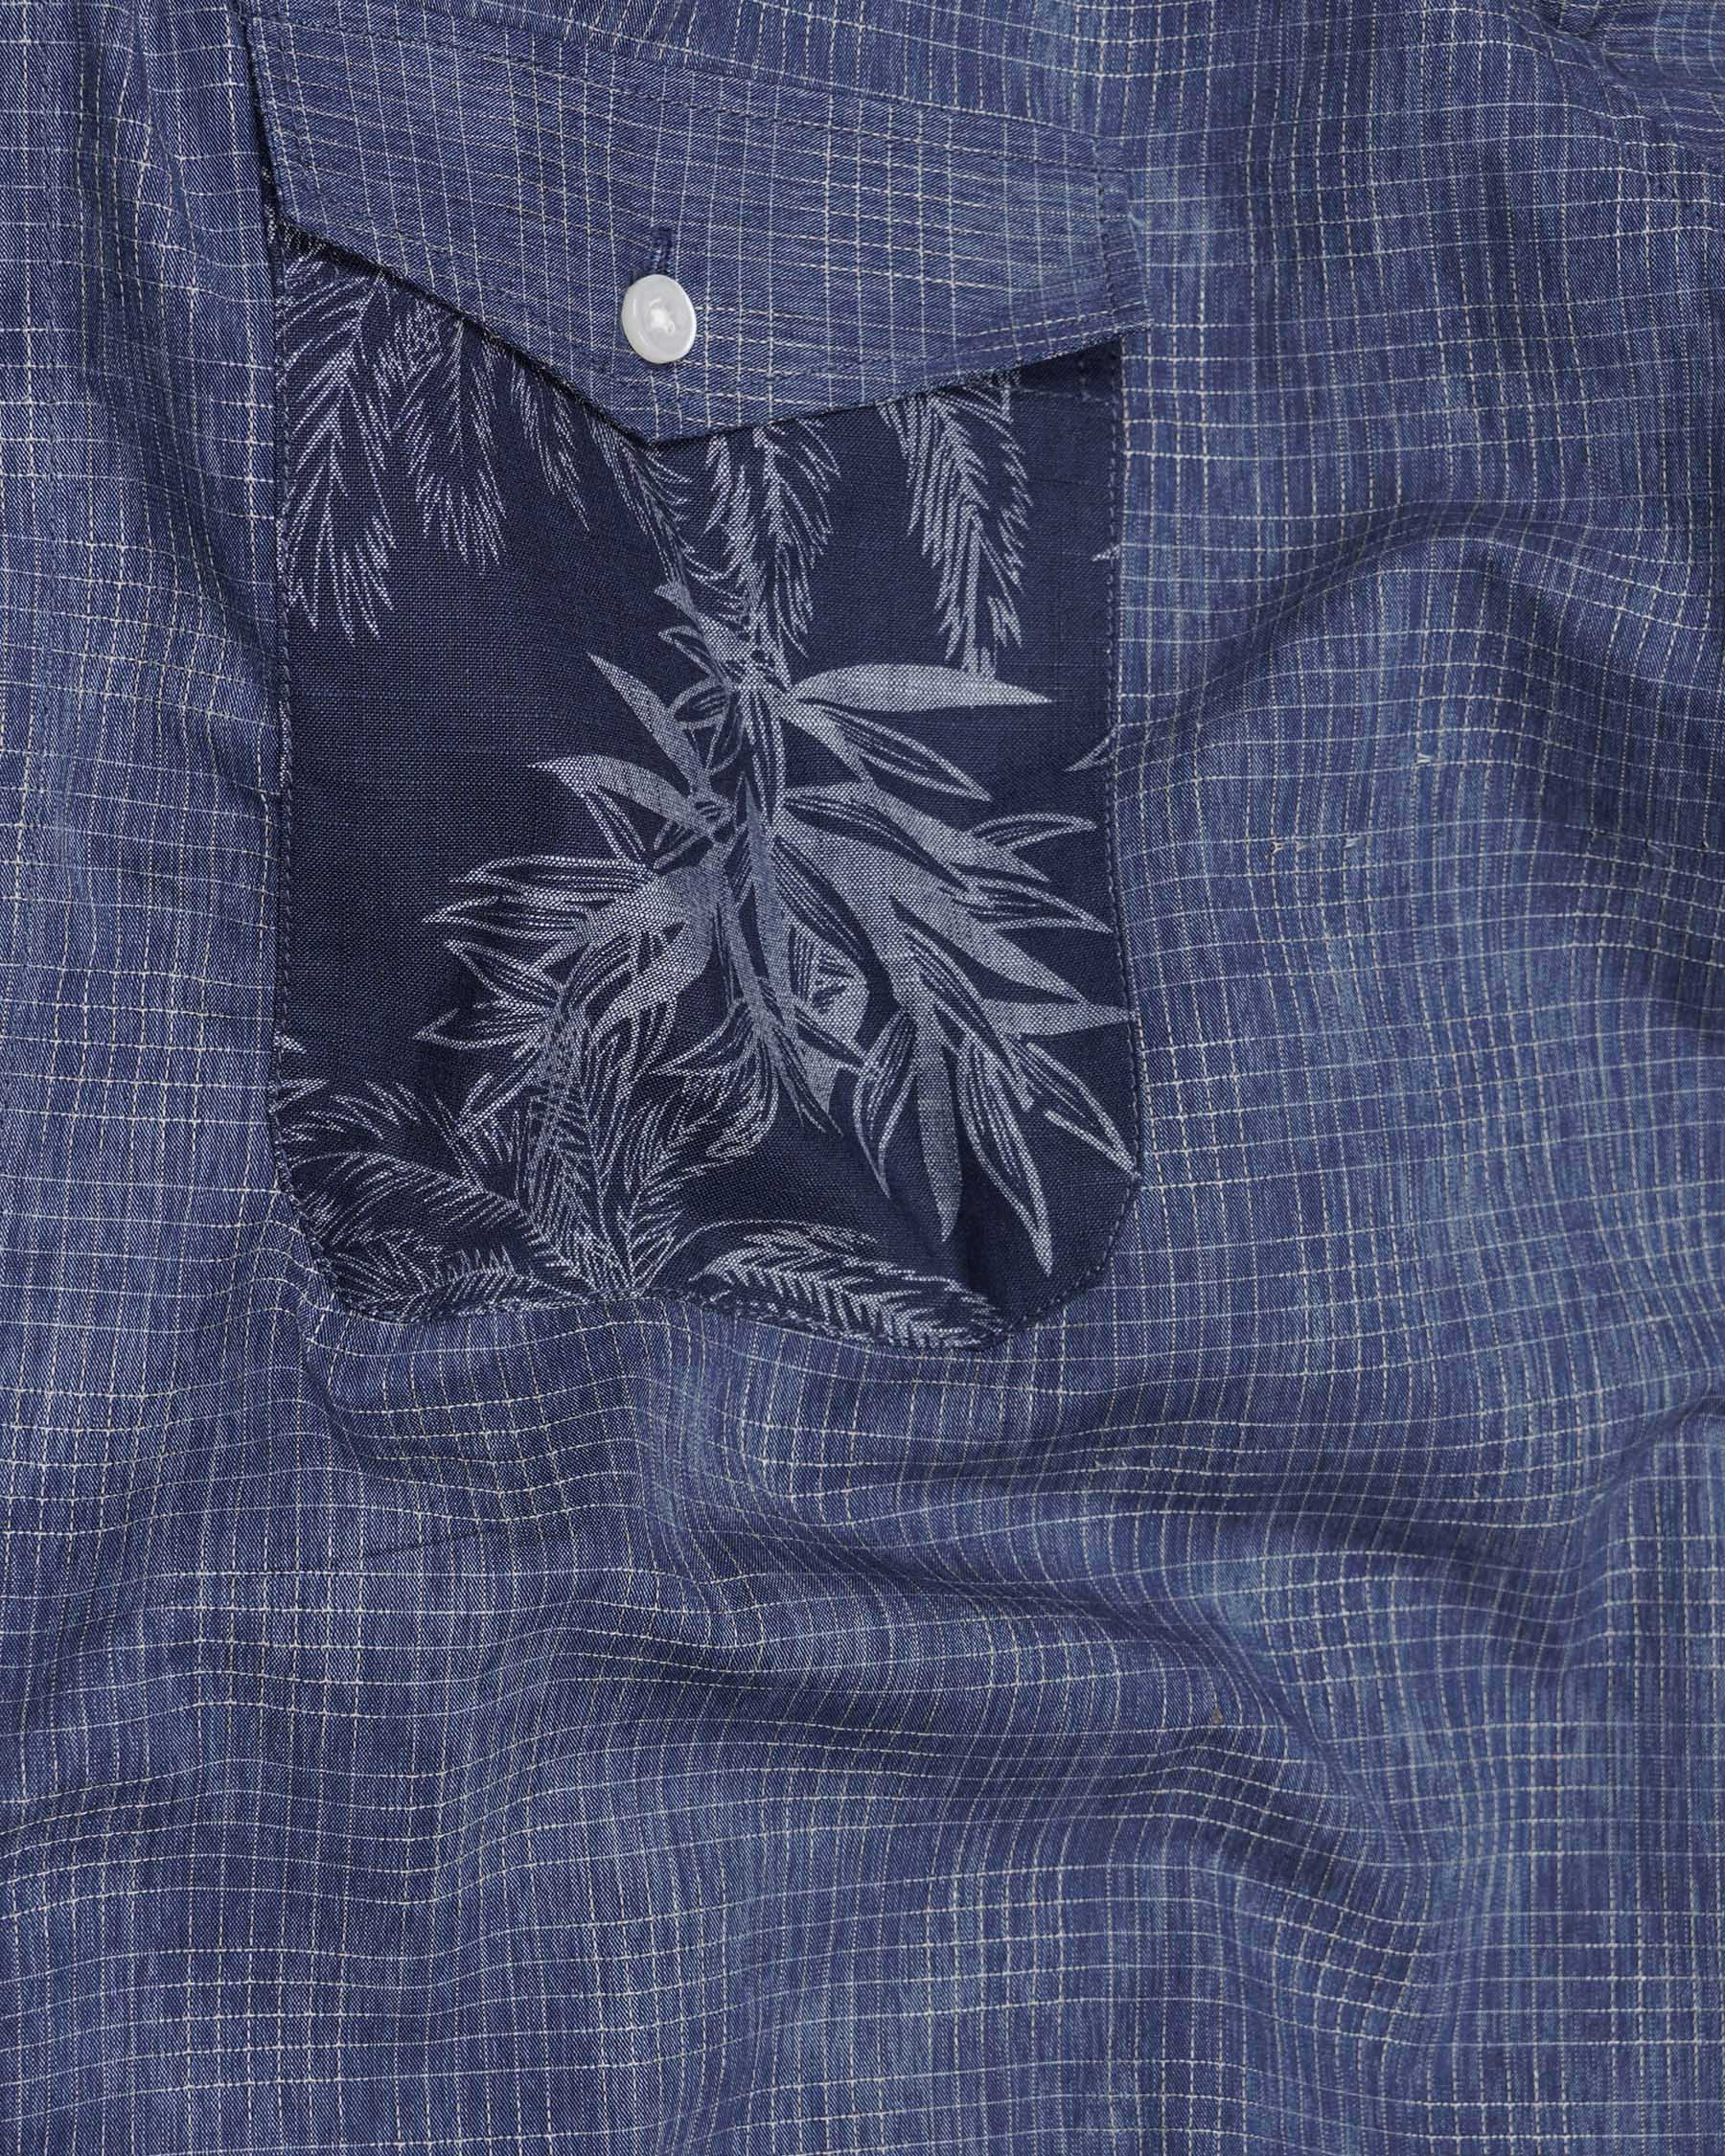 Denim Blue and Gunmetal Blue Checkered and Leaves Textured Chambray Designer Shirt 7520-38, 7520-H-38, 7520-39, 7520-H-39, 7520-40, 7520-H-40, 7520-42, 7520-H-42, 7520-44, 7520-H-44, 7520-46, 7520-H-46, 7520-48, 7520-H-48, 7520-50, 7520-H-50, 7520-52, 7520-H-52